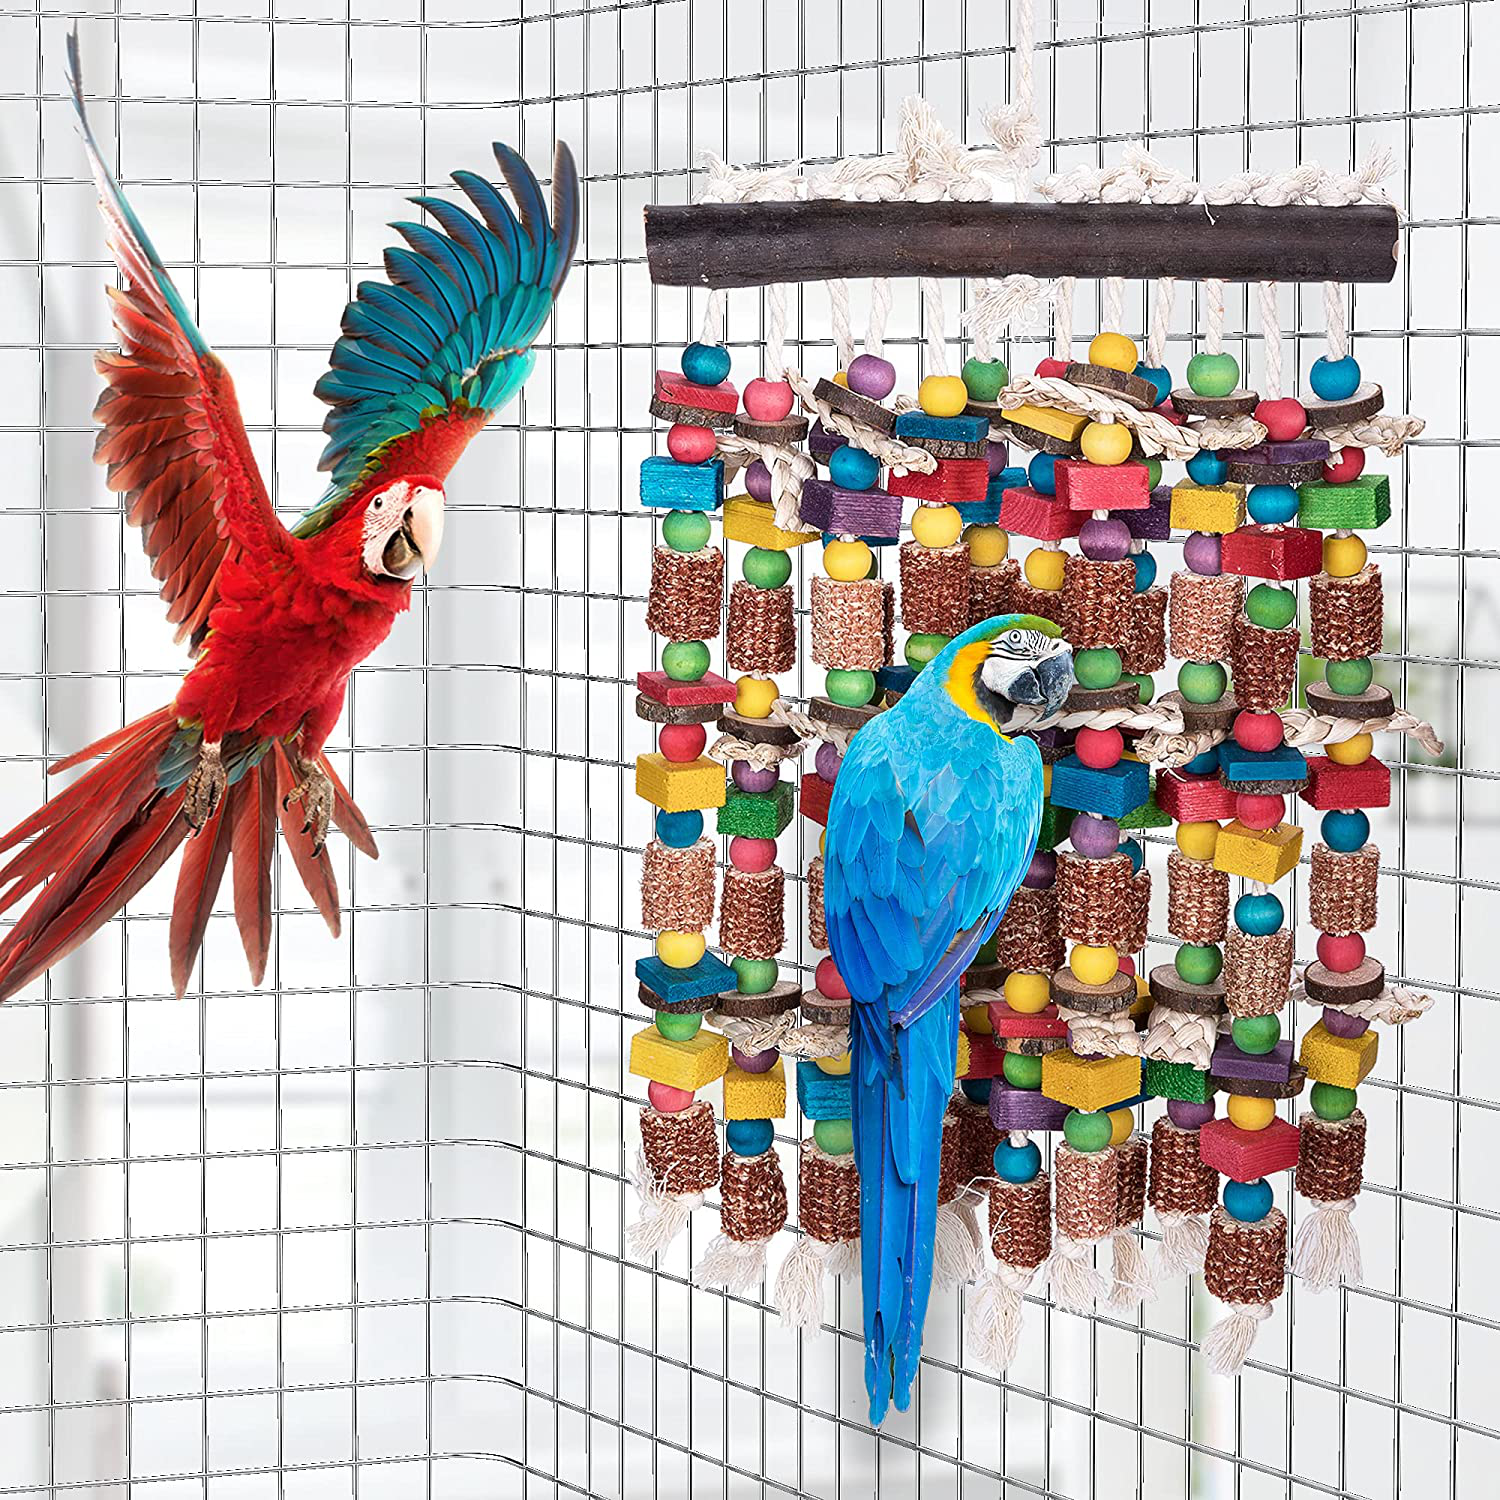 Wehhbtye Super Large Bird Parrot Macaw Chewing Toy-27''X11'' Multicolor Natural Wood Block Knot Bird Bite Tearing Toy,Parrot Corn Cob Chewing Toy for Macaws Cokatoos,African Grey,All Amazona Parrot Animals & Pet Supplies > Pet Supplies > Bird Supplies > Bird Toys Wehhbtye   